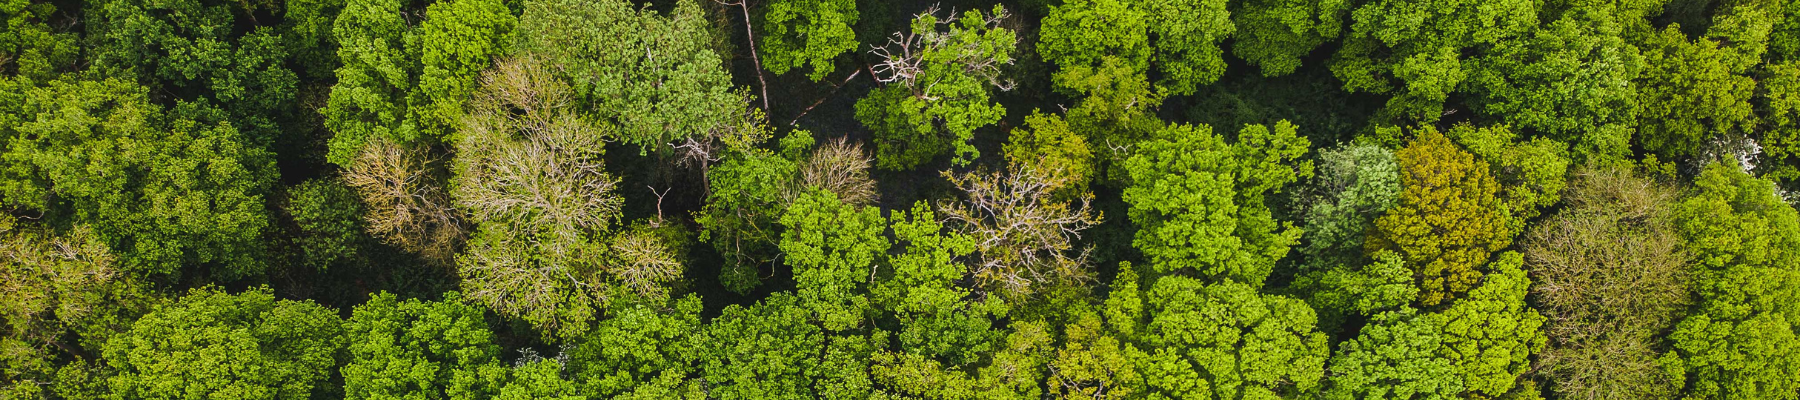 A birds eye view of the canopy of green trees in the Forest